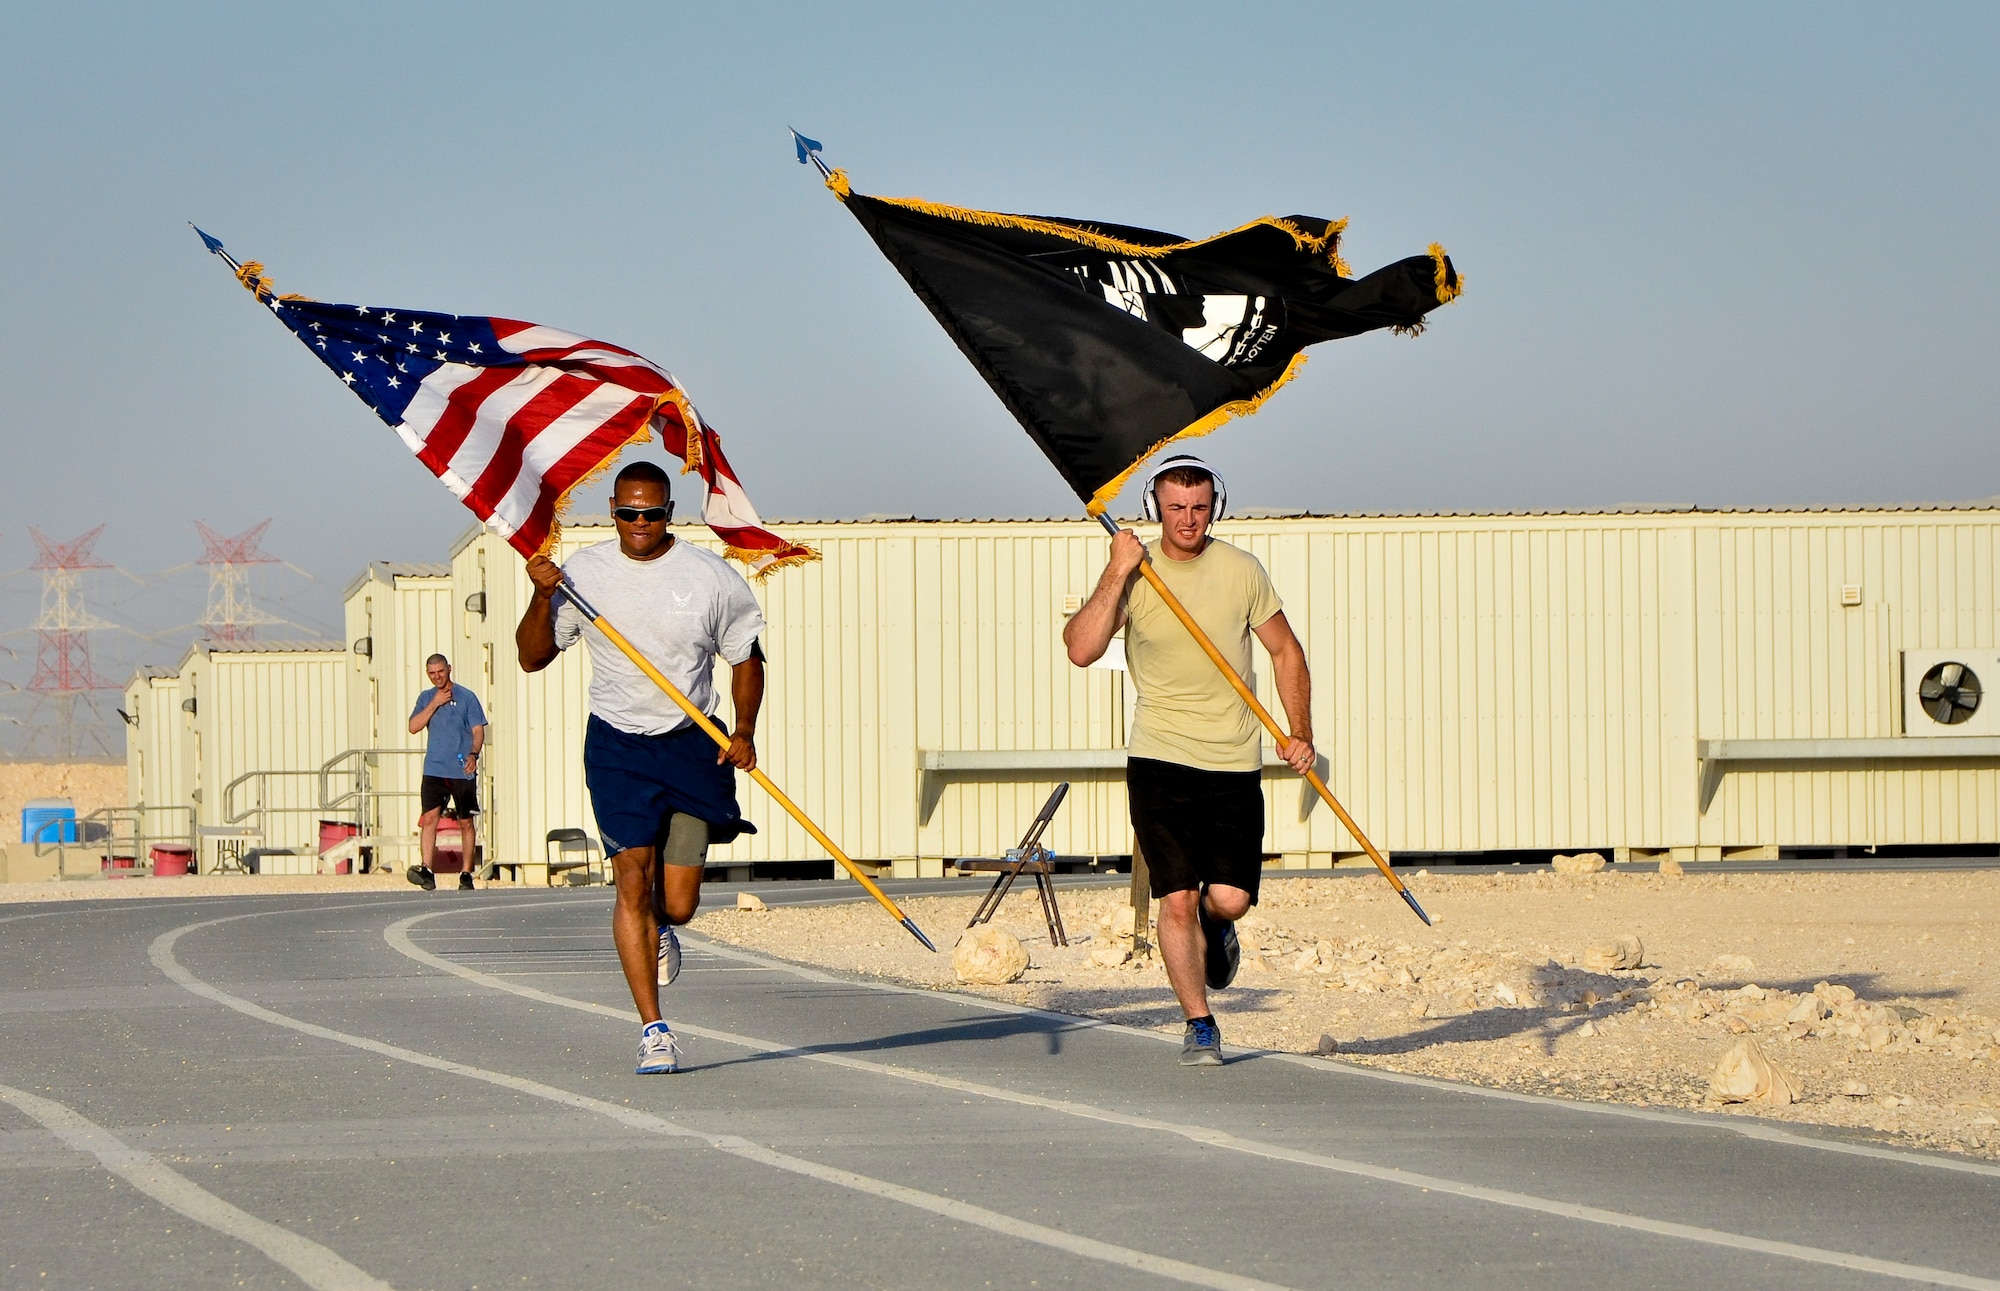 Service members deployed to the 379th Air Expeditionary Wing participate in the 24-hour prisoners of war and missing in action vigil run at the 379th AEW in Southwest Asia, Sept. 21, 2013. The run began Sept. 20 and culminated with a closing ceremony and traditional flag folding by the base honor guard in reverence to those still missing. (U.S. Air Force photo/Staff Sgt. Benjamin W. Stratton)